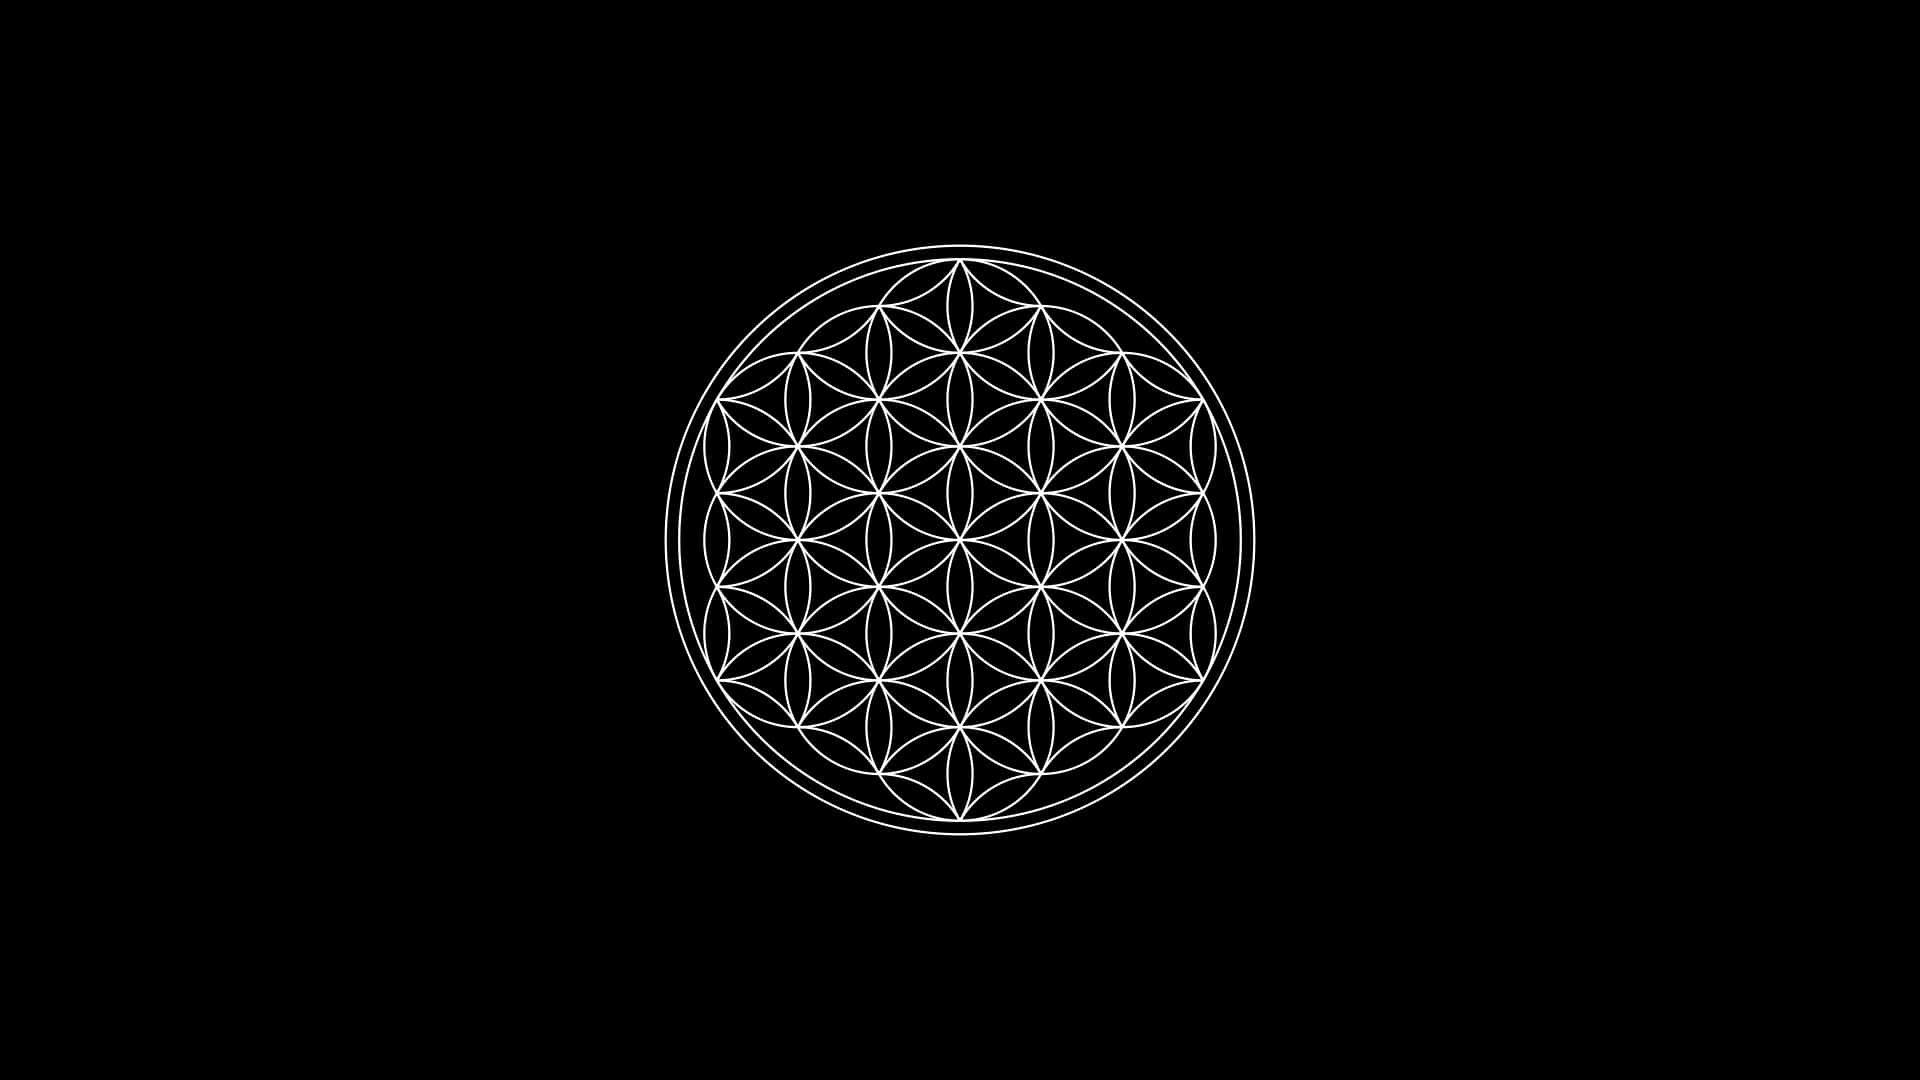 Find Balance and Harmony in the Sacred Flower Of Life Wallpaper